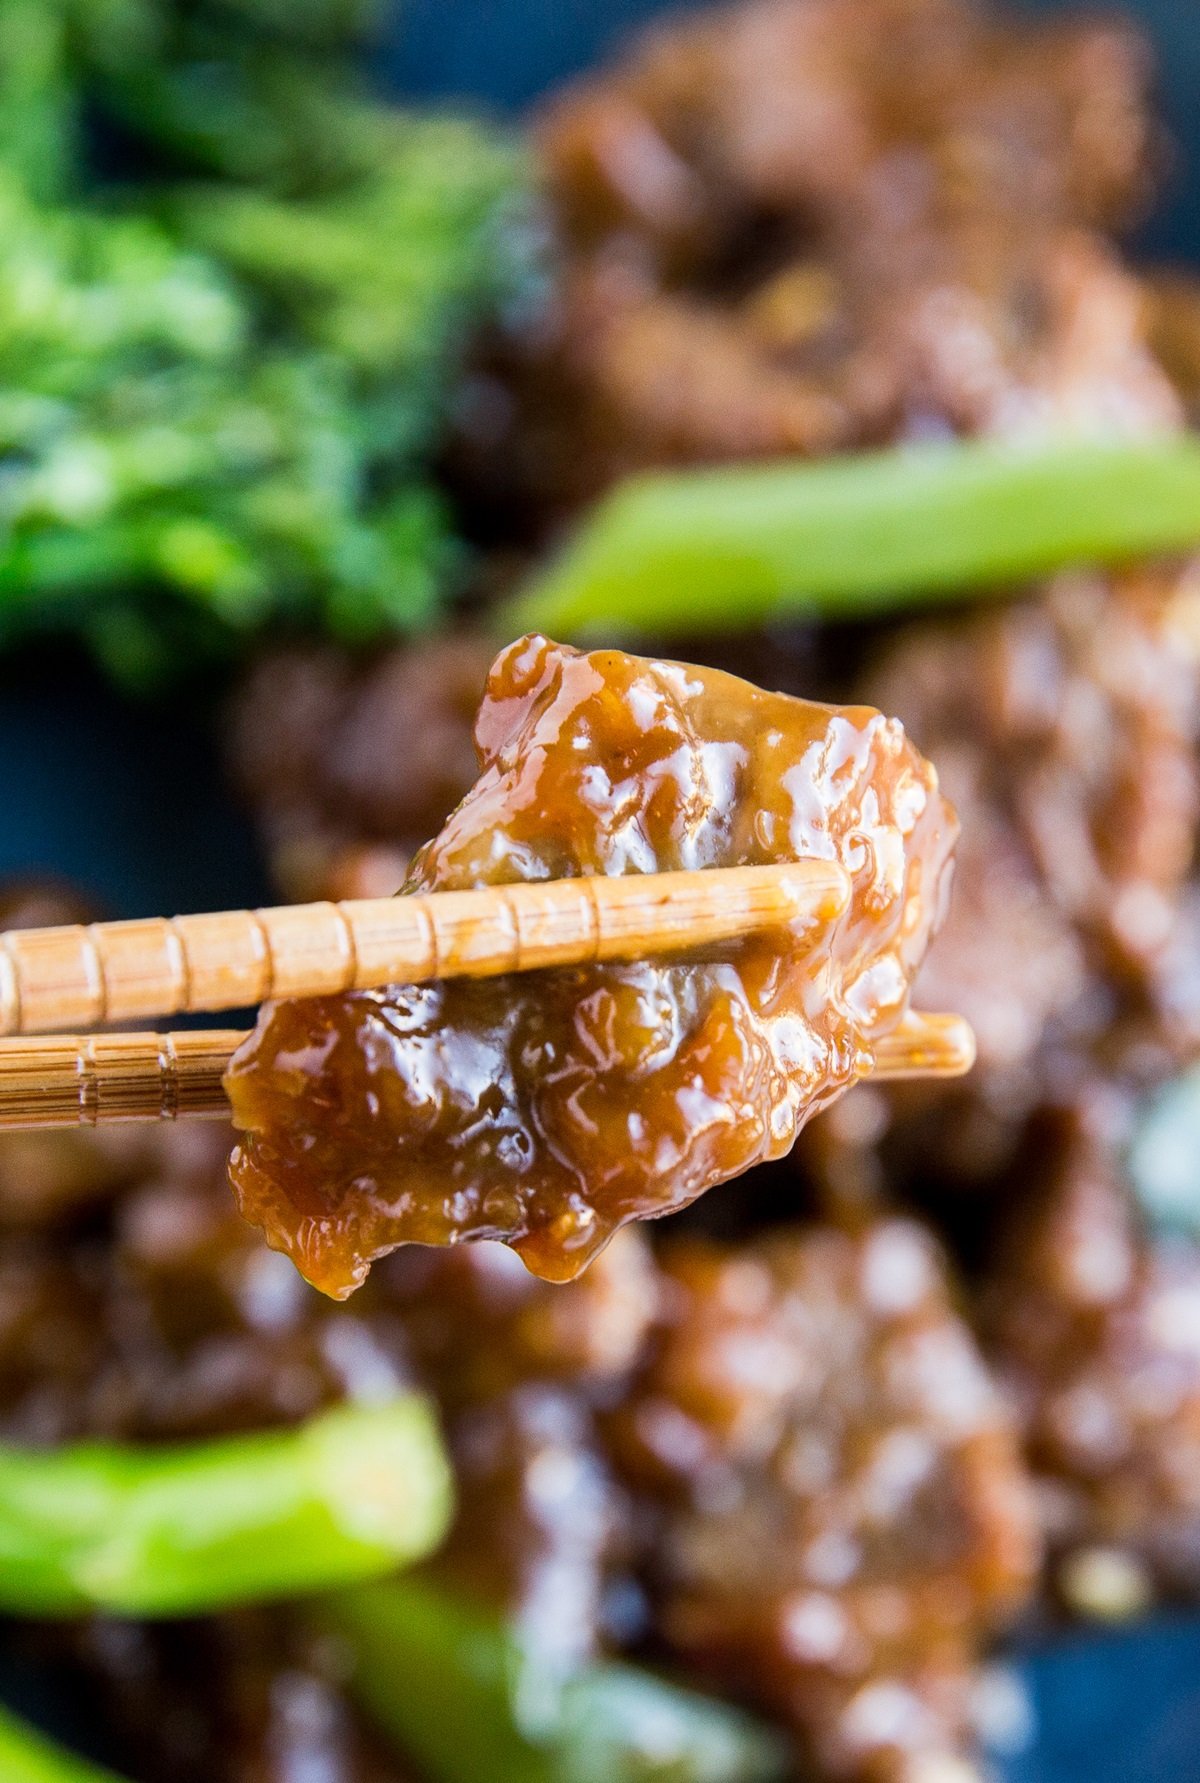 Chopstick picking up a piece of Mongolian beef so you can see the crispy, saucy deliciousness up close.